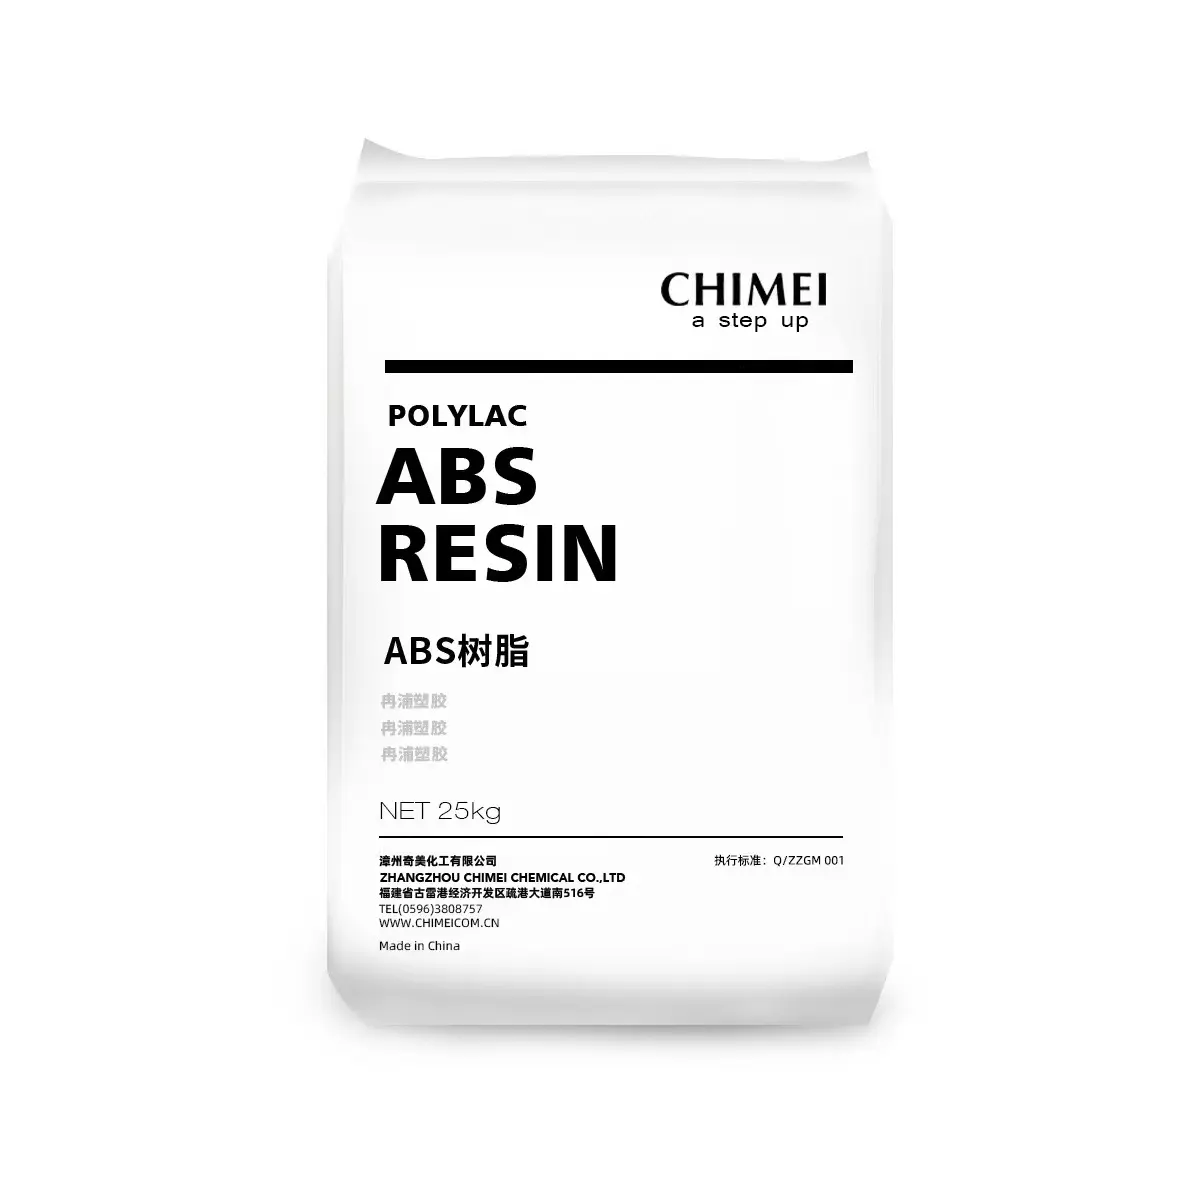 ABS Taiwan Chimei PA-757F high gloss food grade household groceries plastic toys injection molding ABS resin